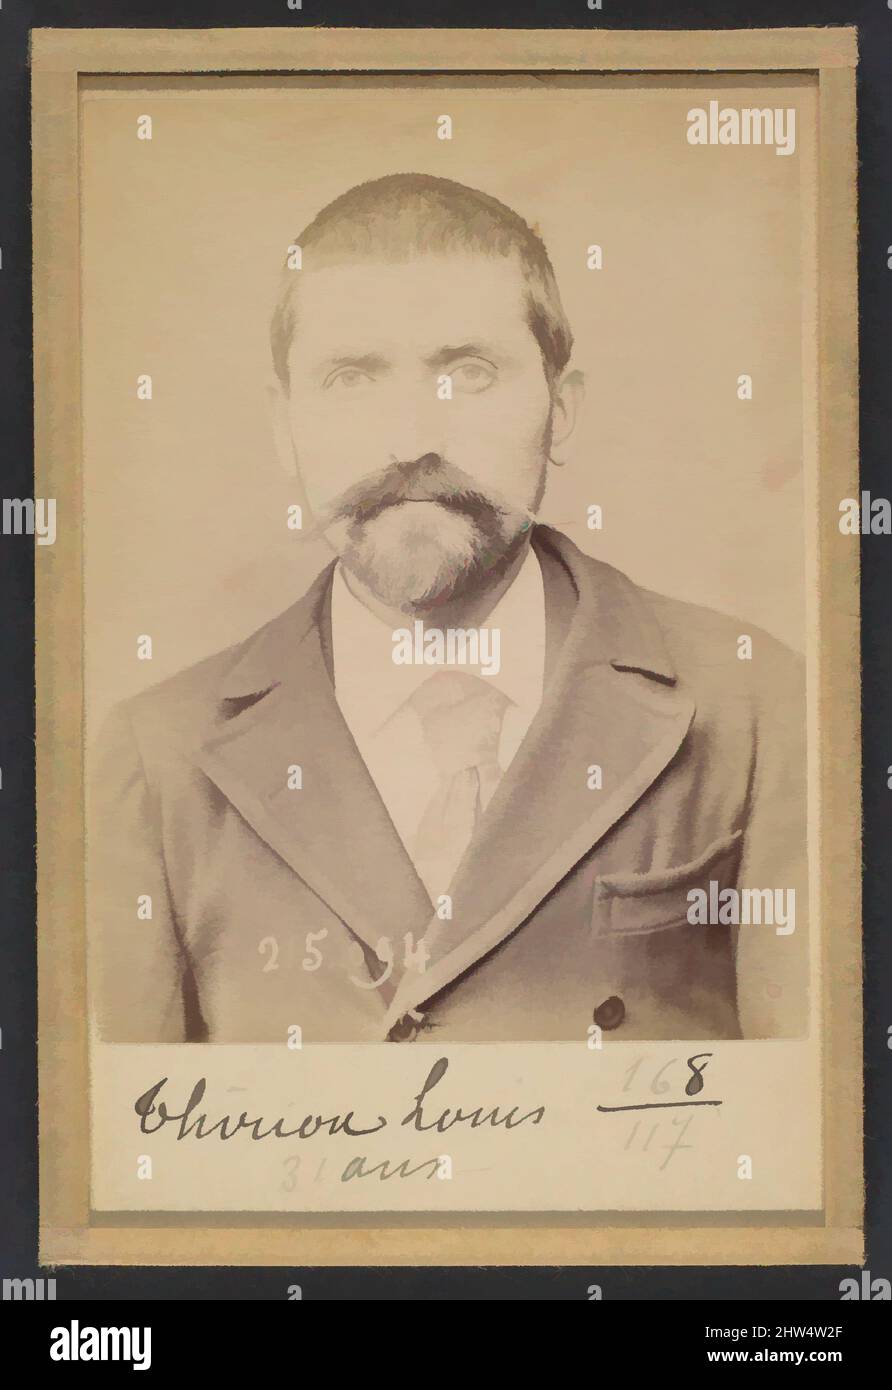 Art inspired by Thirion. Louis, Joseph. 31 ans, né à Autrey (Vosges). Journaliste. Anarchiste. 4/3/94., 1894, Albumen silver print from glass negative, 10.5 x 7 x 0.5 cm (4 1/8 x 2 3/4 x 3/16 in.) each, Photographs, Alphonse Bertillon (French, 1853–1914), Born into a distinguished, Classic works modernized by Artotop with a splash of modernity. Shapes, color and value, eye-catching visual impact on art. Emotions through freedom of artworks in a contemporary way. A timeless message pursuing a wildly creative new direction. Artists turning to the digital medium and creating the Artotop NFT Stock Photo